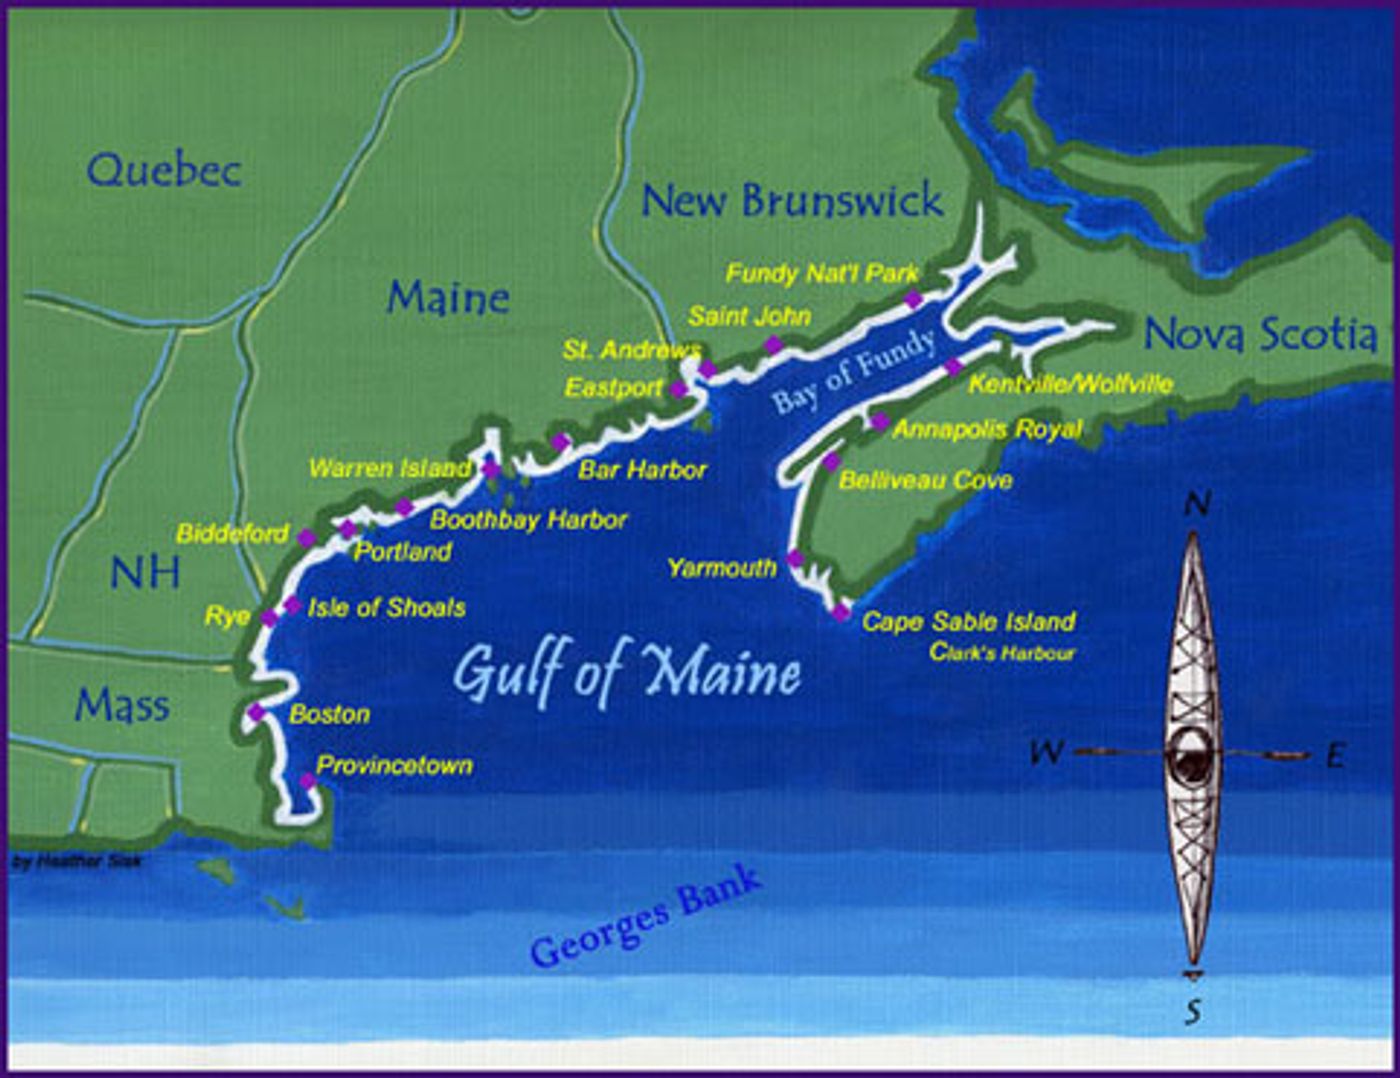 The Gulf of Maine covers a large region. Photo: GoMeExpedition